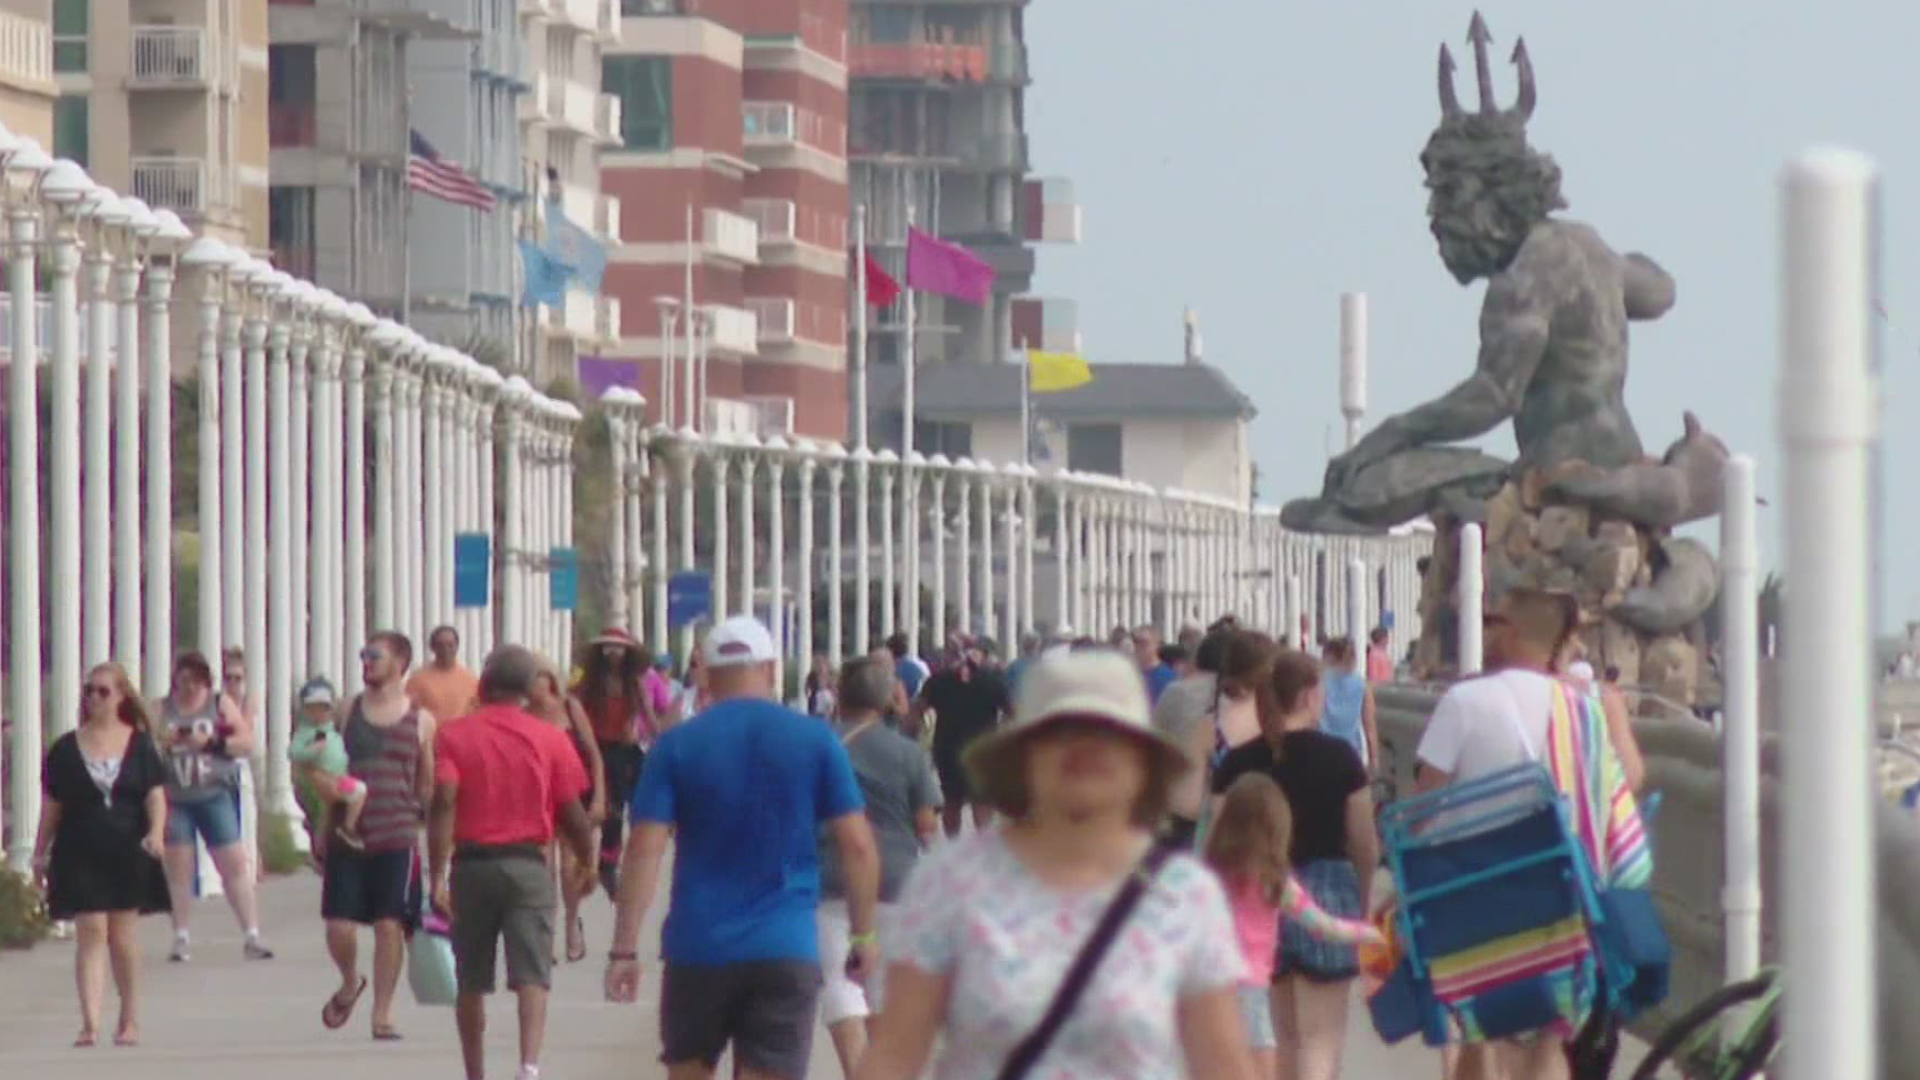 Virginia Beach's latest Resort-Area Ambassador program's mission is to make the Oceanfront experience better. This includes making people feel welcome and safe.